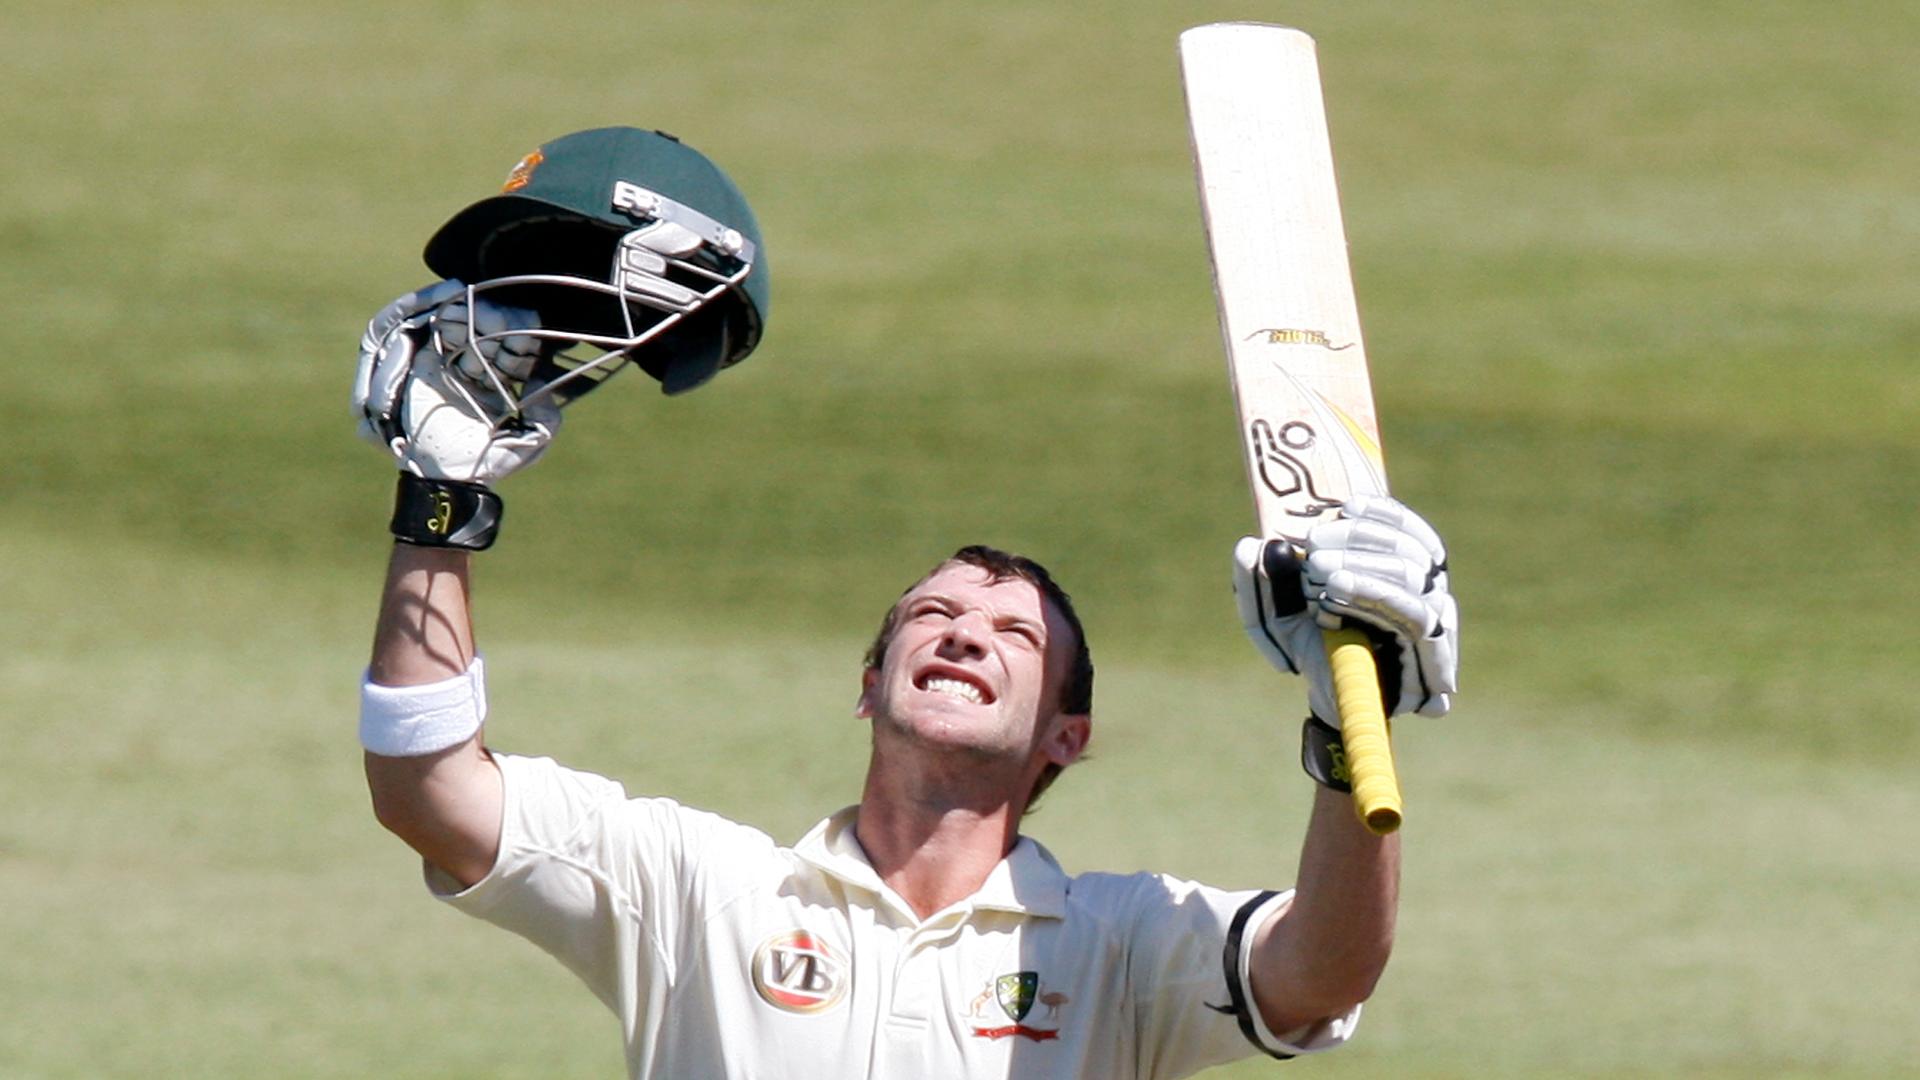 Australia's Phil Hughes celebrates a high score during an international match in 2009. Hughes died on November 27, 2014, after being struck in the neck by a bowled ball during a match in Australia's domestic Sheffield Shield competition.